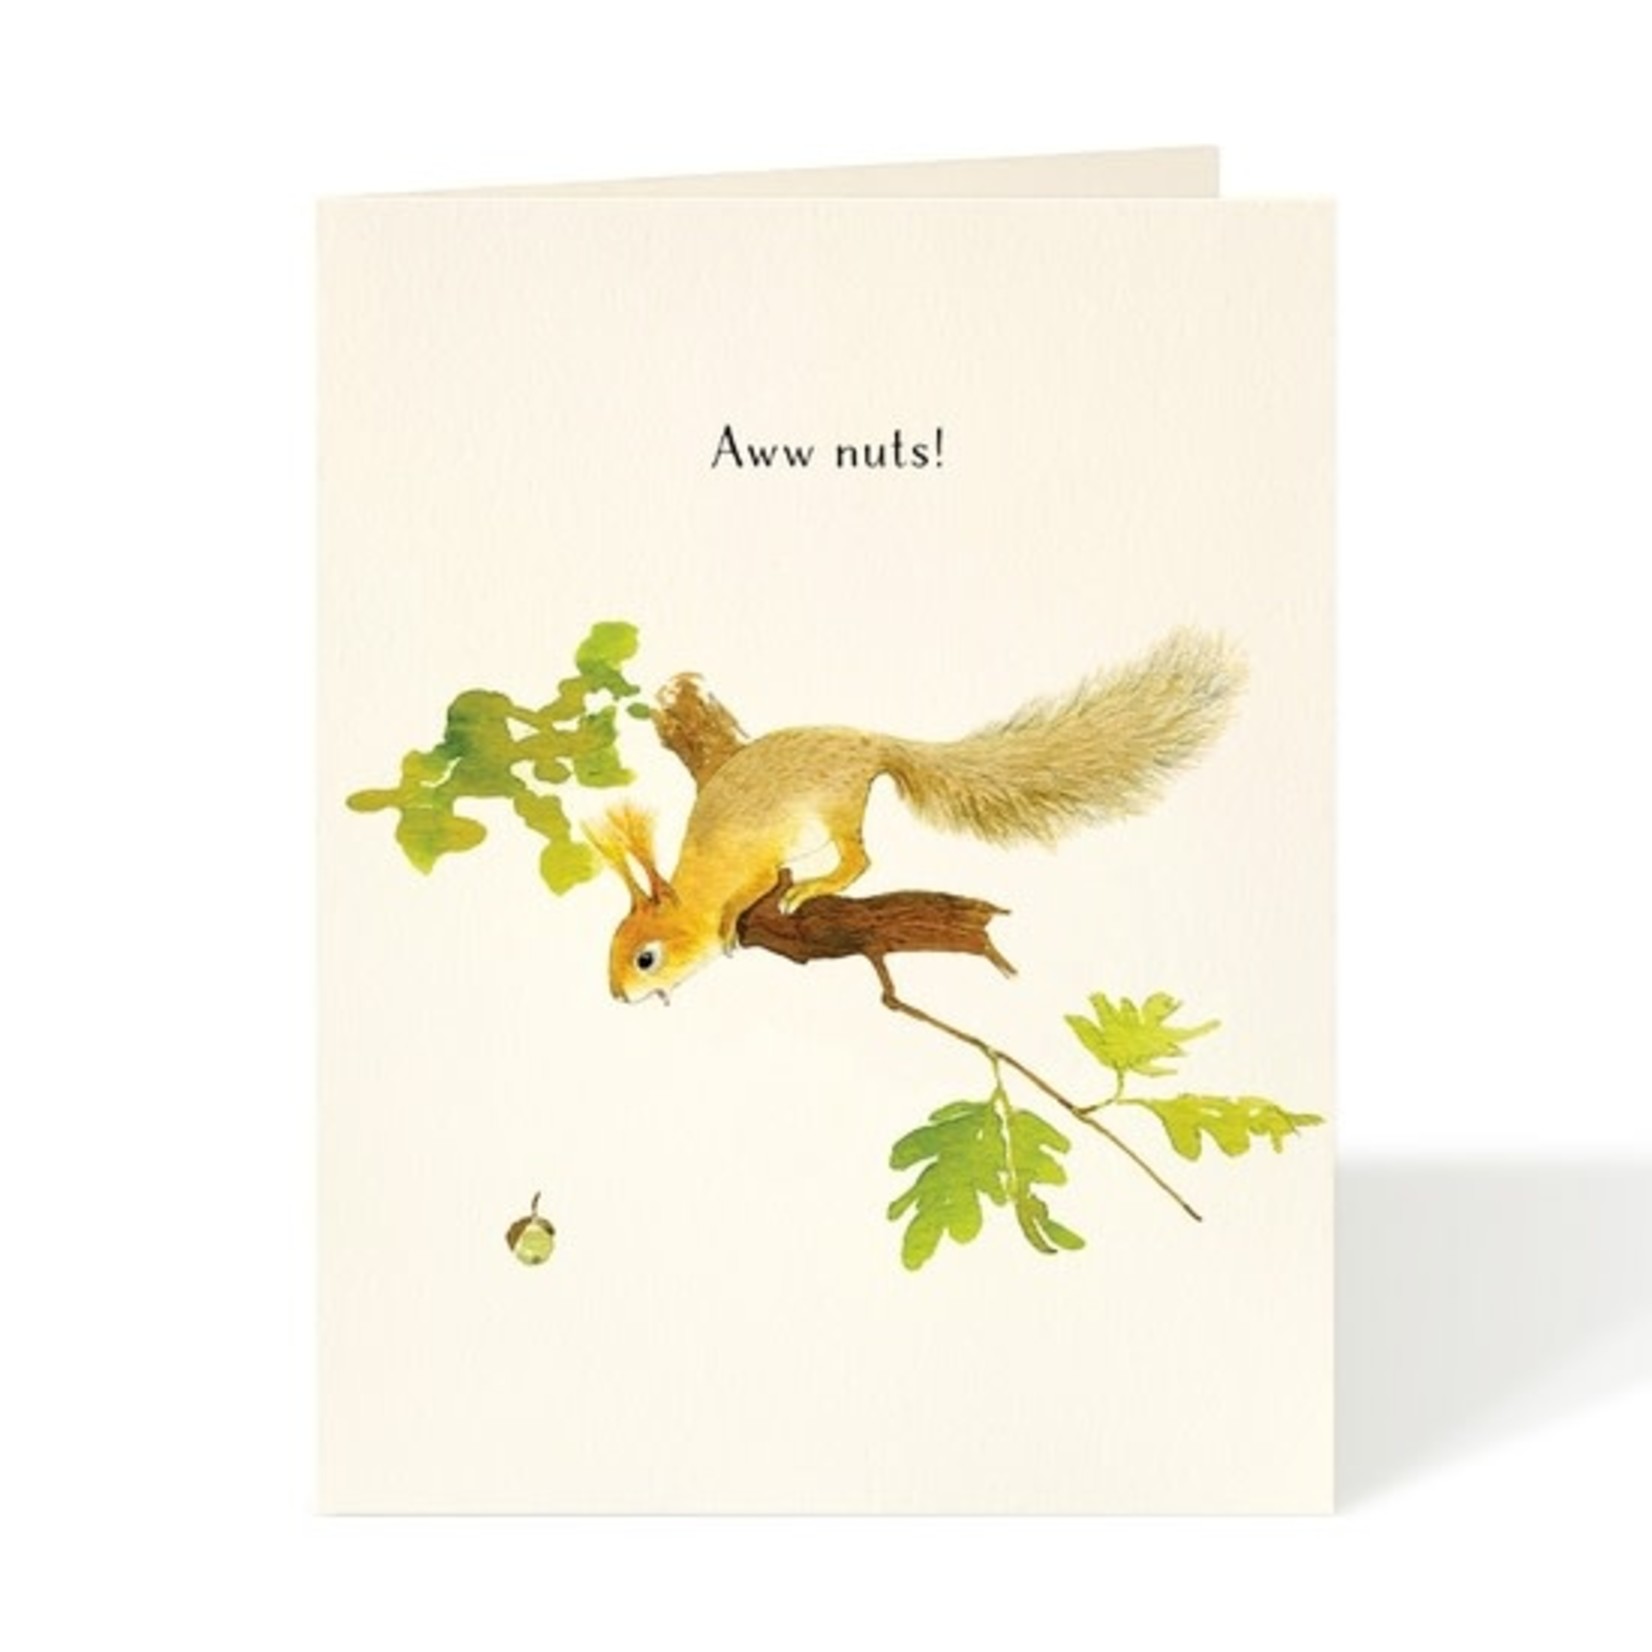 Greeting Cards - Feel Better Aww Nuts!